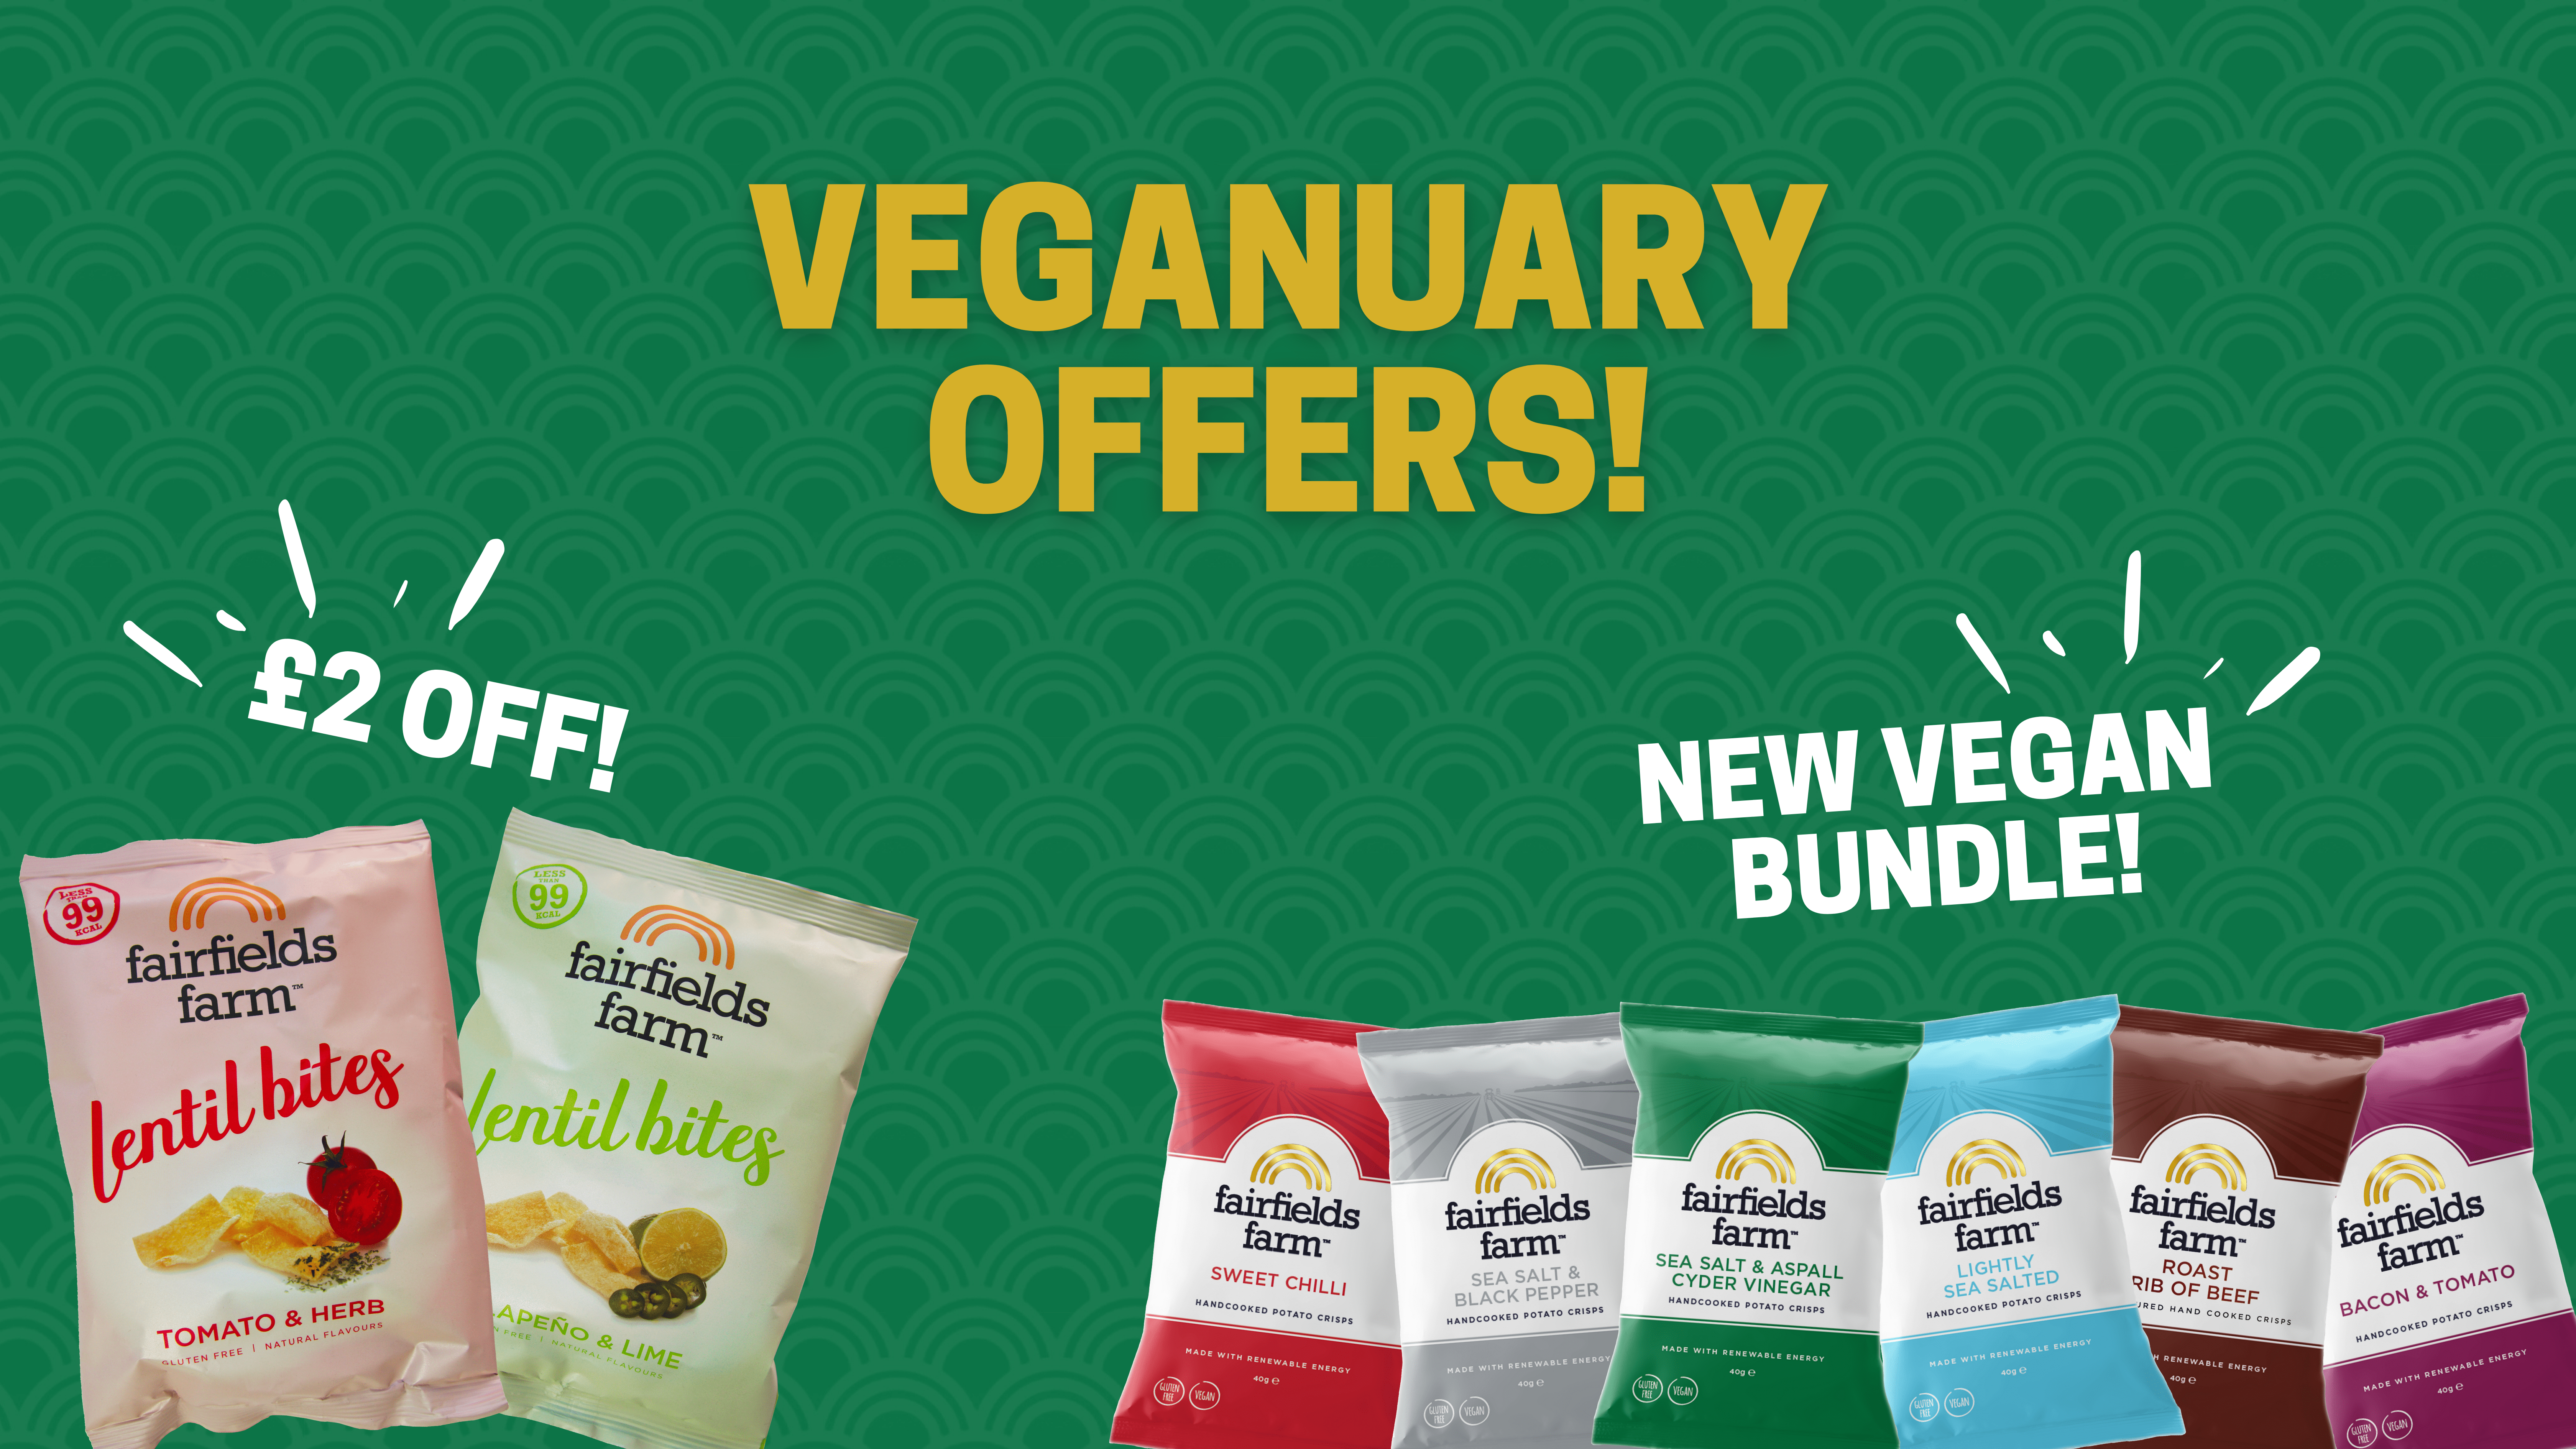 Special Veganuary Offers